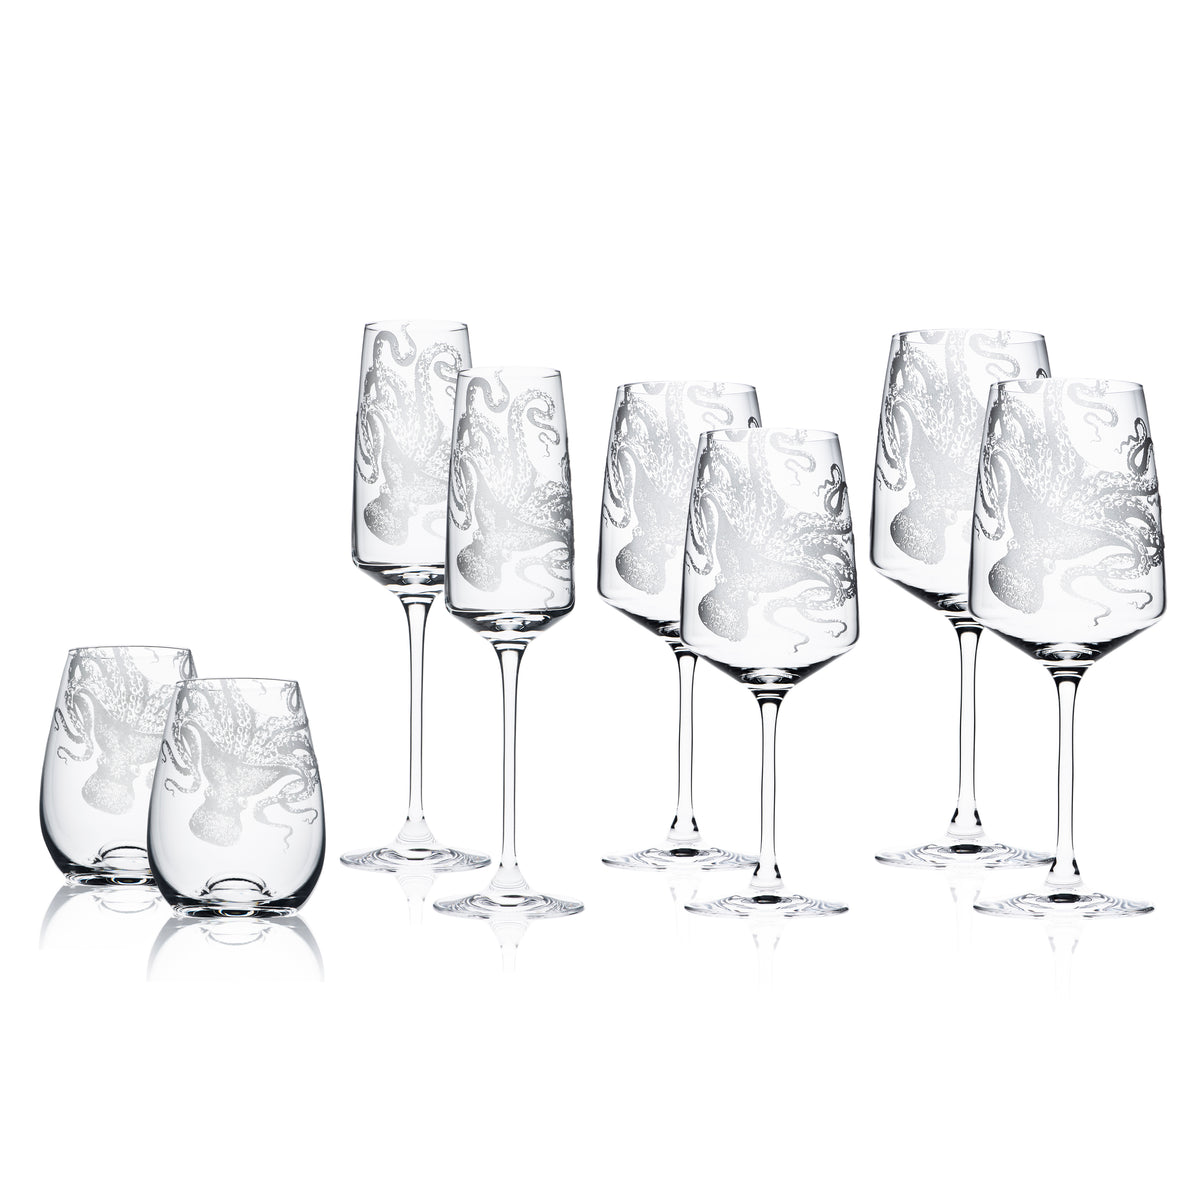 Lucy the Octopus is sand-etched into this hand decorated lead-free crystal wine glass collection from caskata, featuring 2 stemless wine glasses, 2 champagne flutes, 2 white wine and 2 red wine glasses.